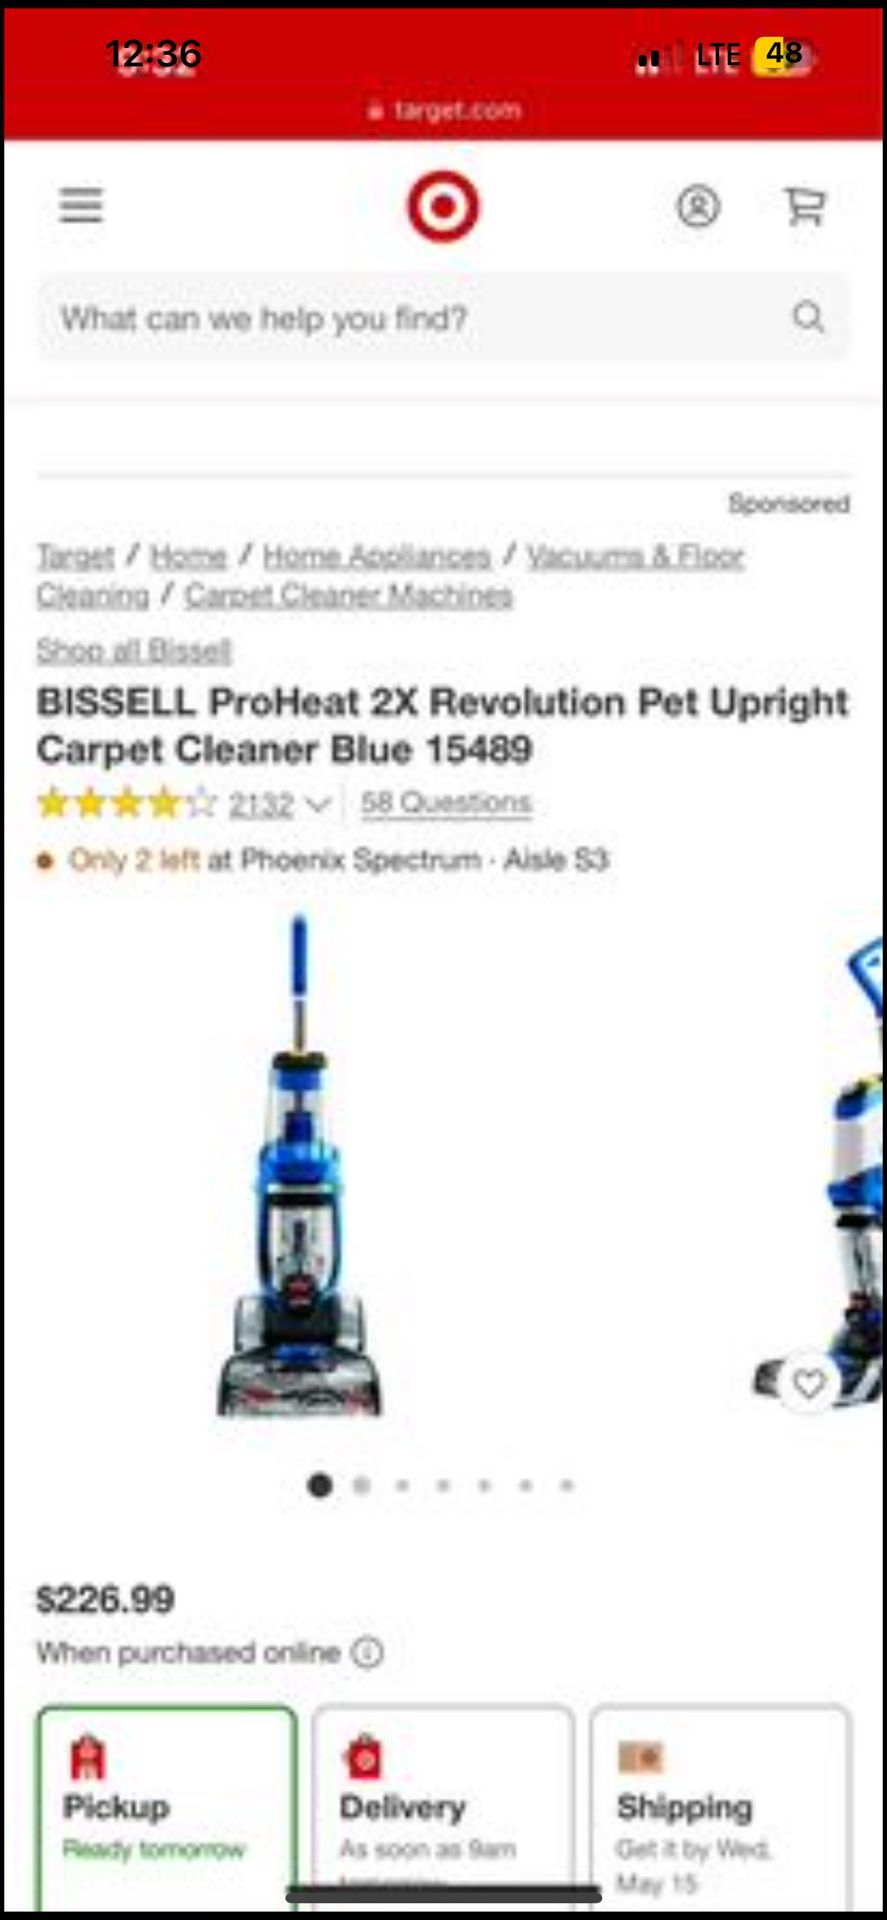 NEW!!! BISSELL ProHeat 2X Revolution Pet Upright Carpet Cleaner